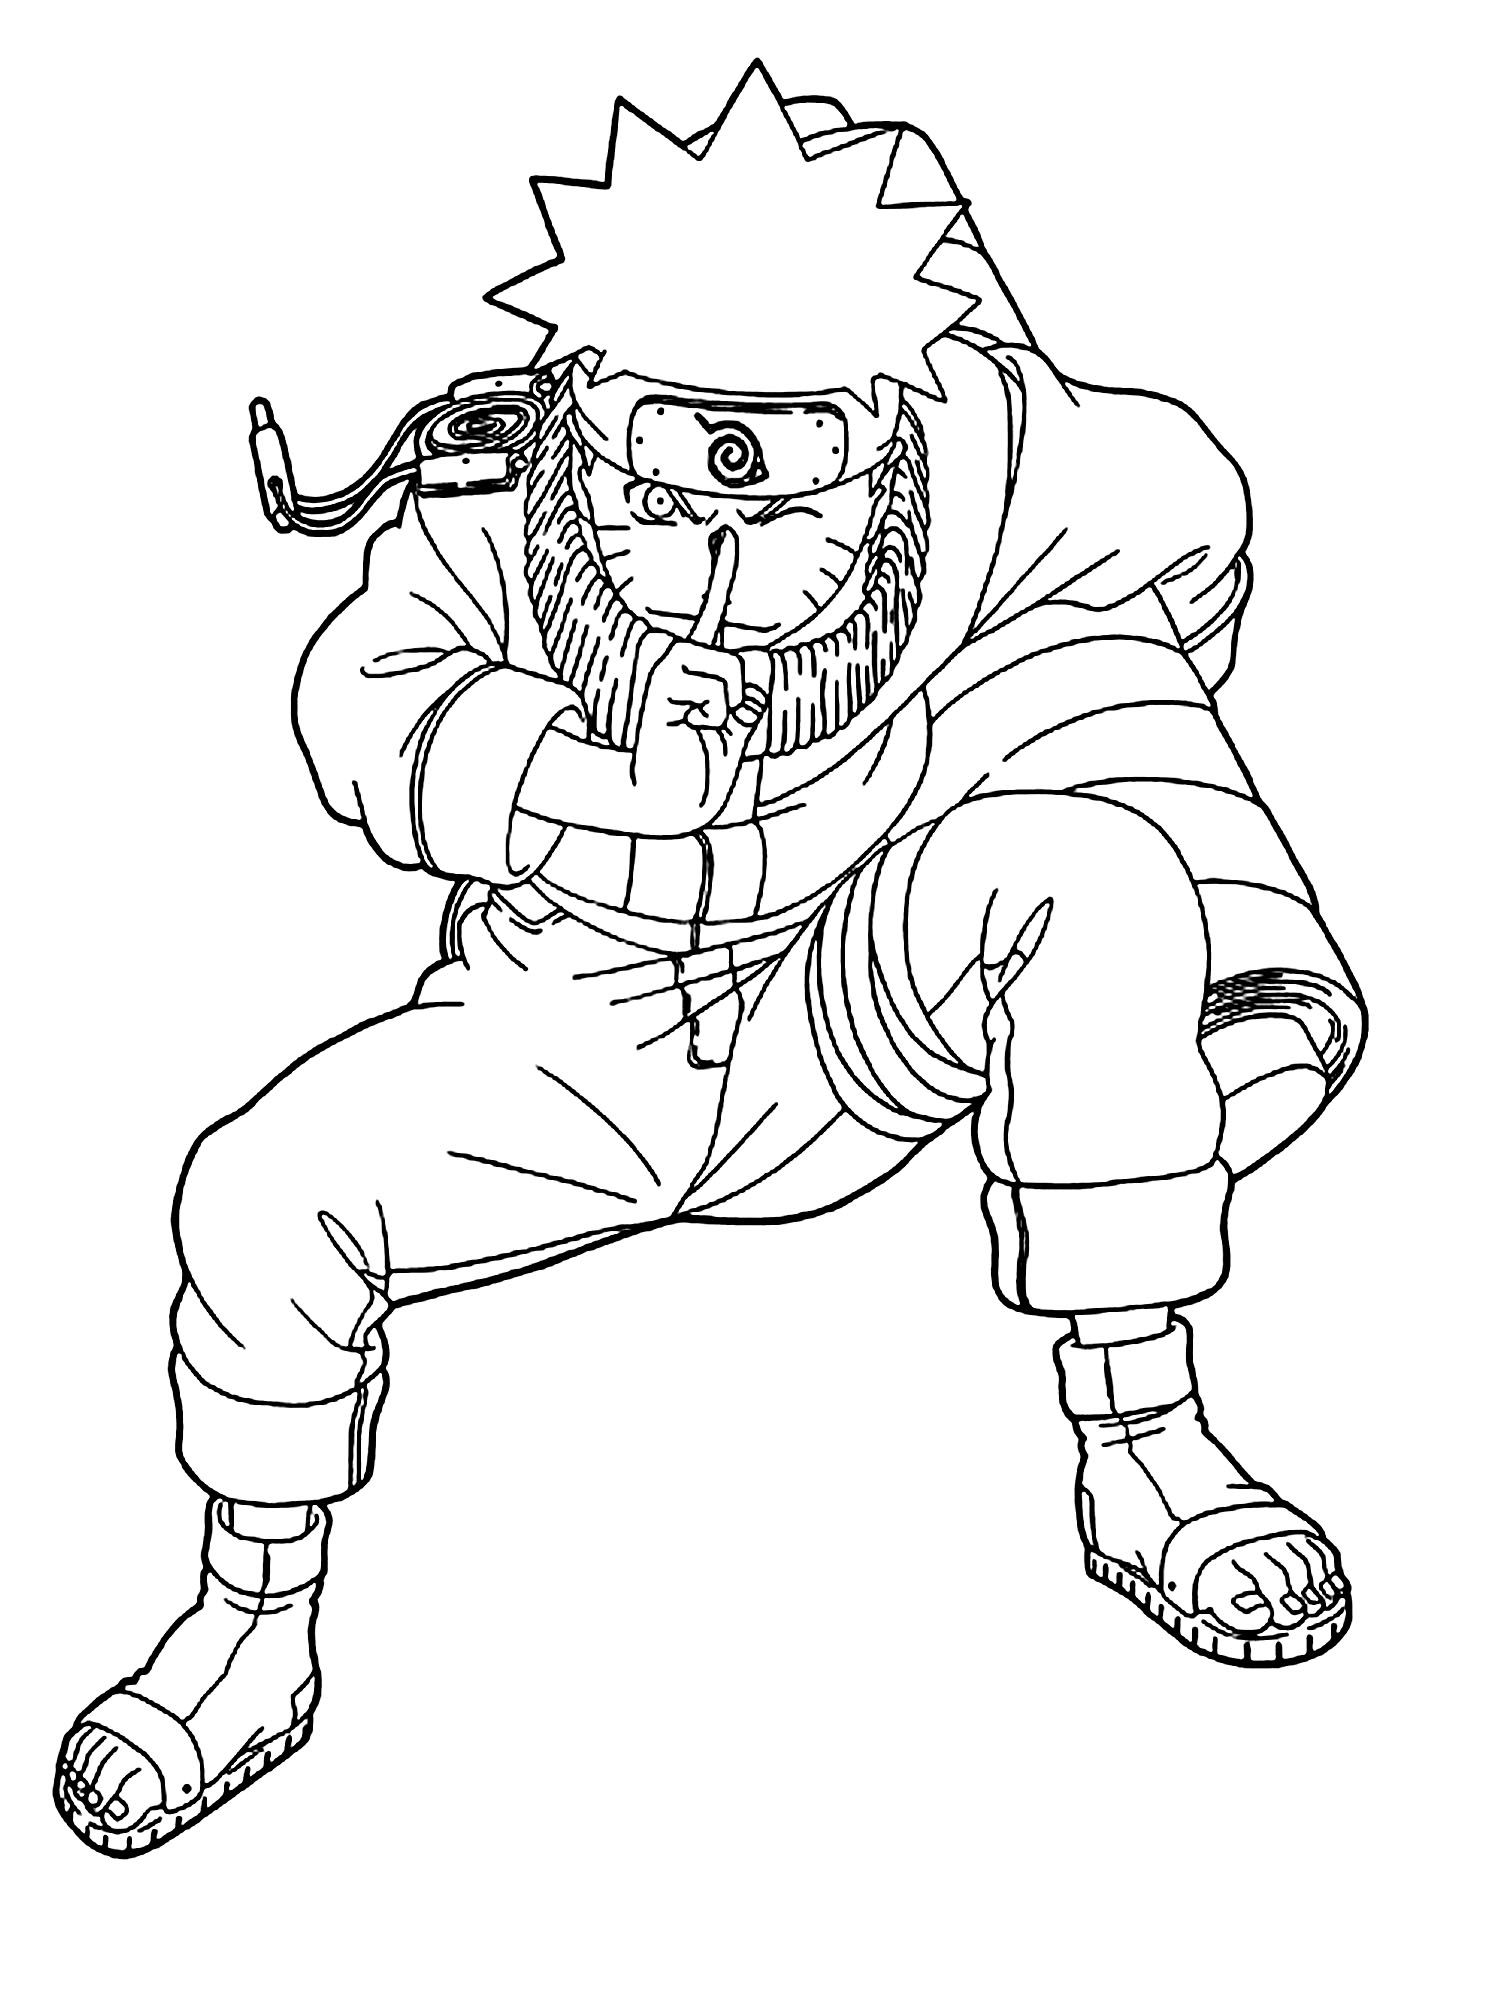 Naruto to print for free - Naruto Kids Coloring Pages